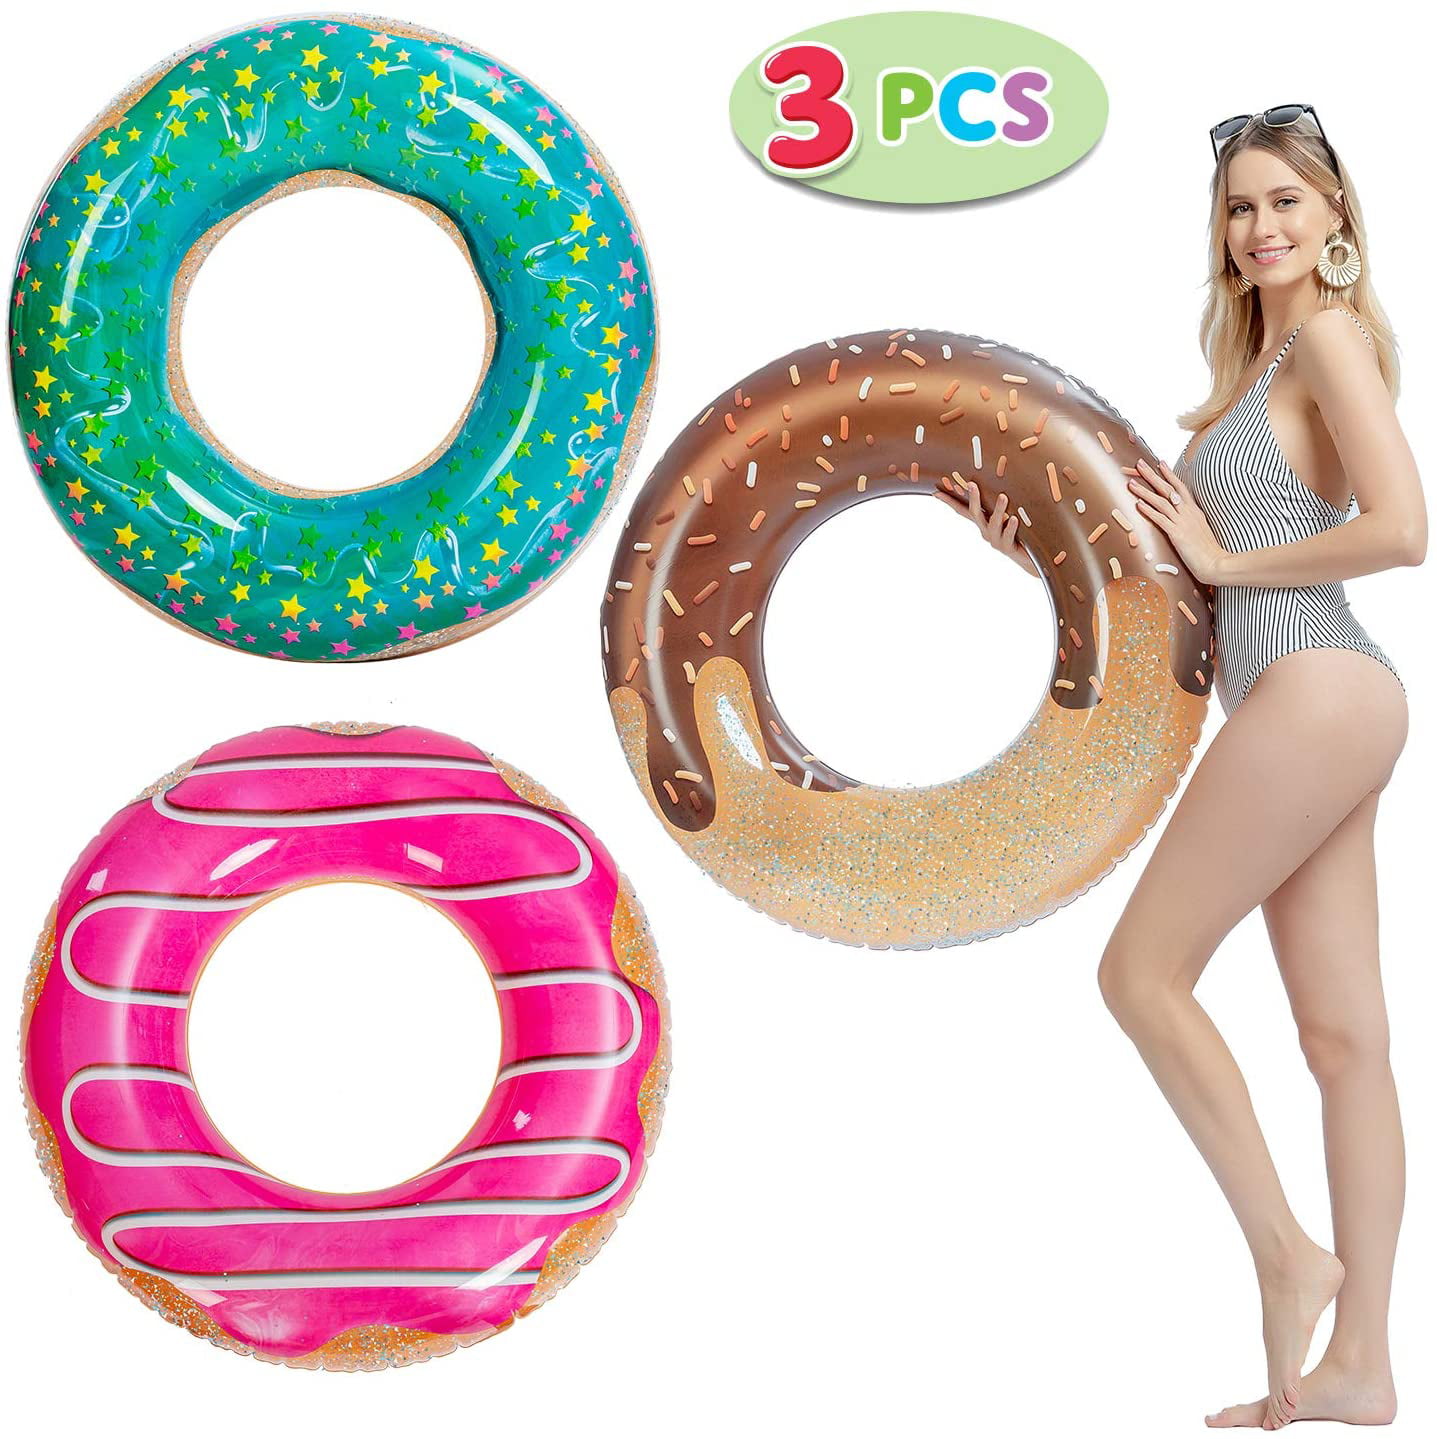 Details about   Inflatable Jumbo Donuts Float Ring Swimming Pool Raft Water Toy Chocolate 